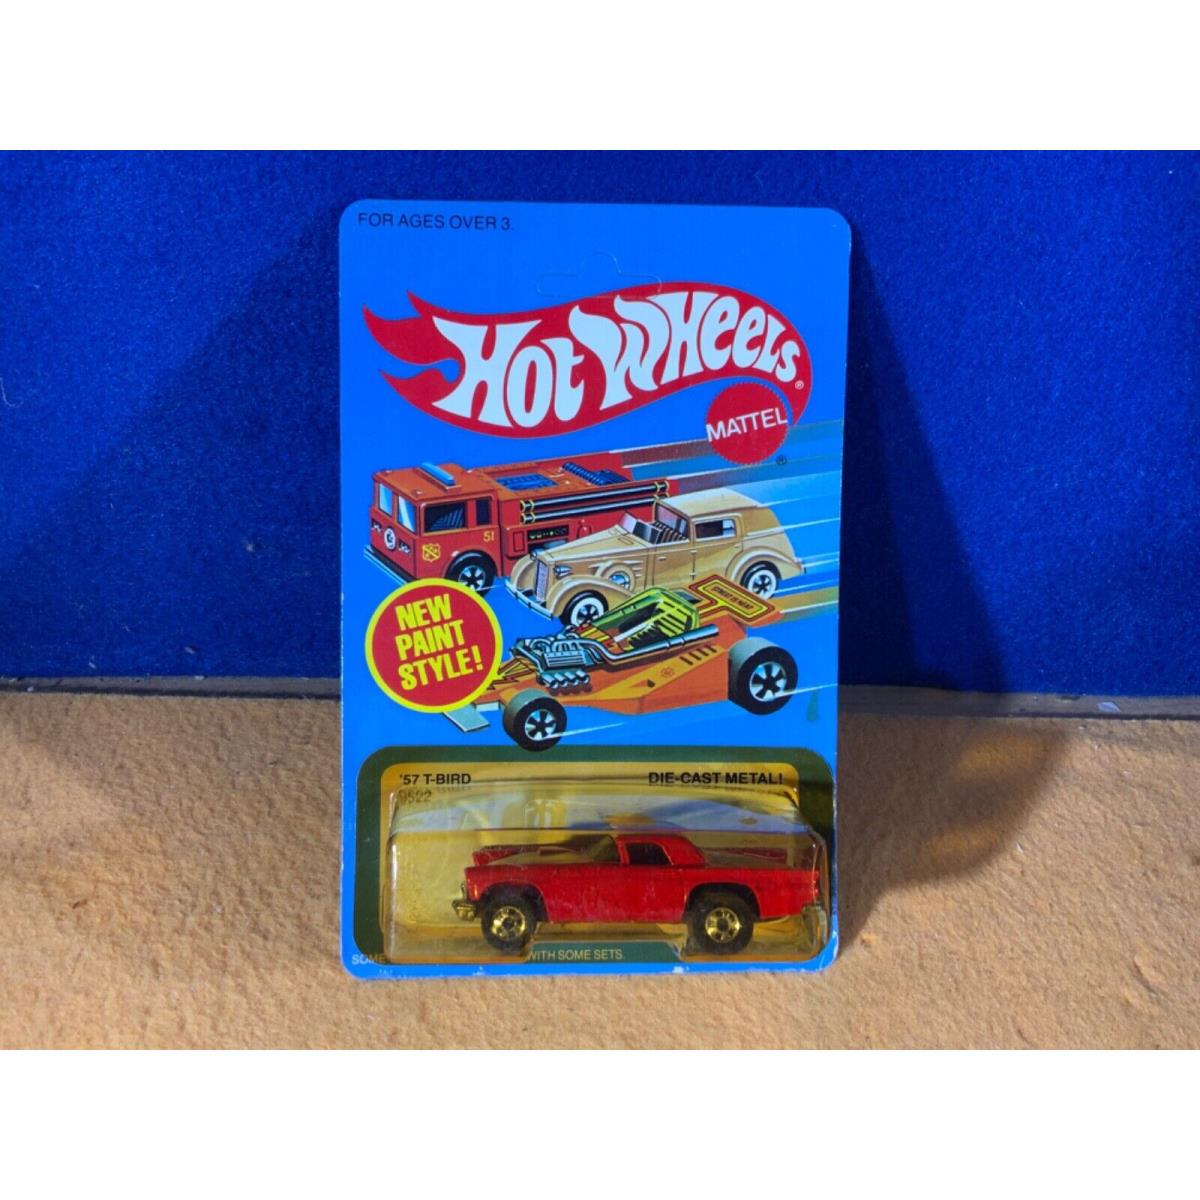 M9-51 Hot Wheels - 57 T-bird - 1982 - Cracked Blister Pack Unpunched Card 9522